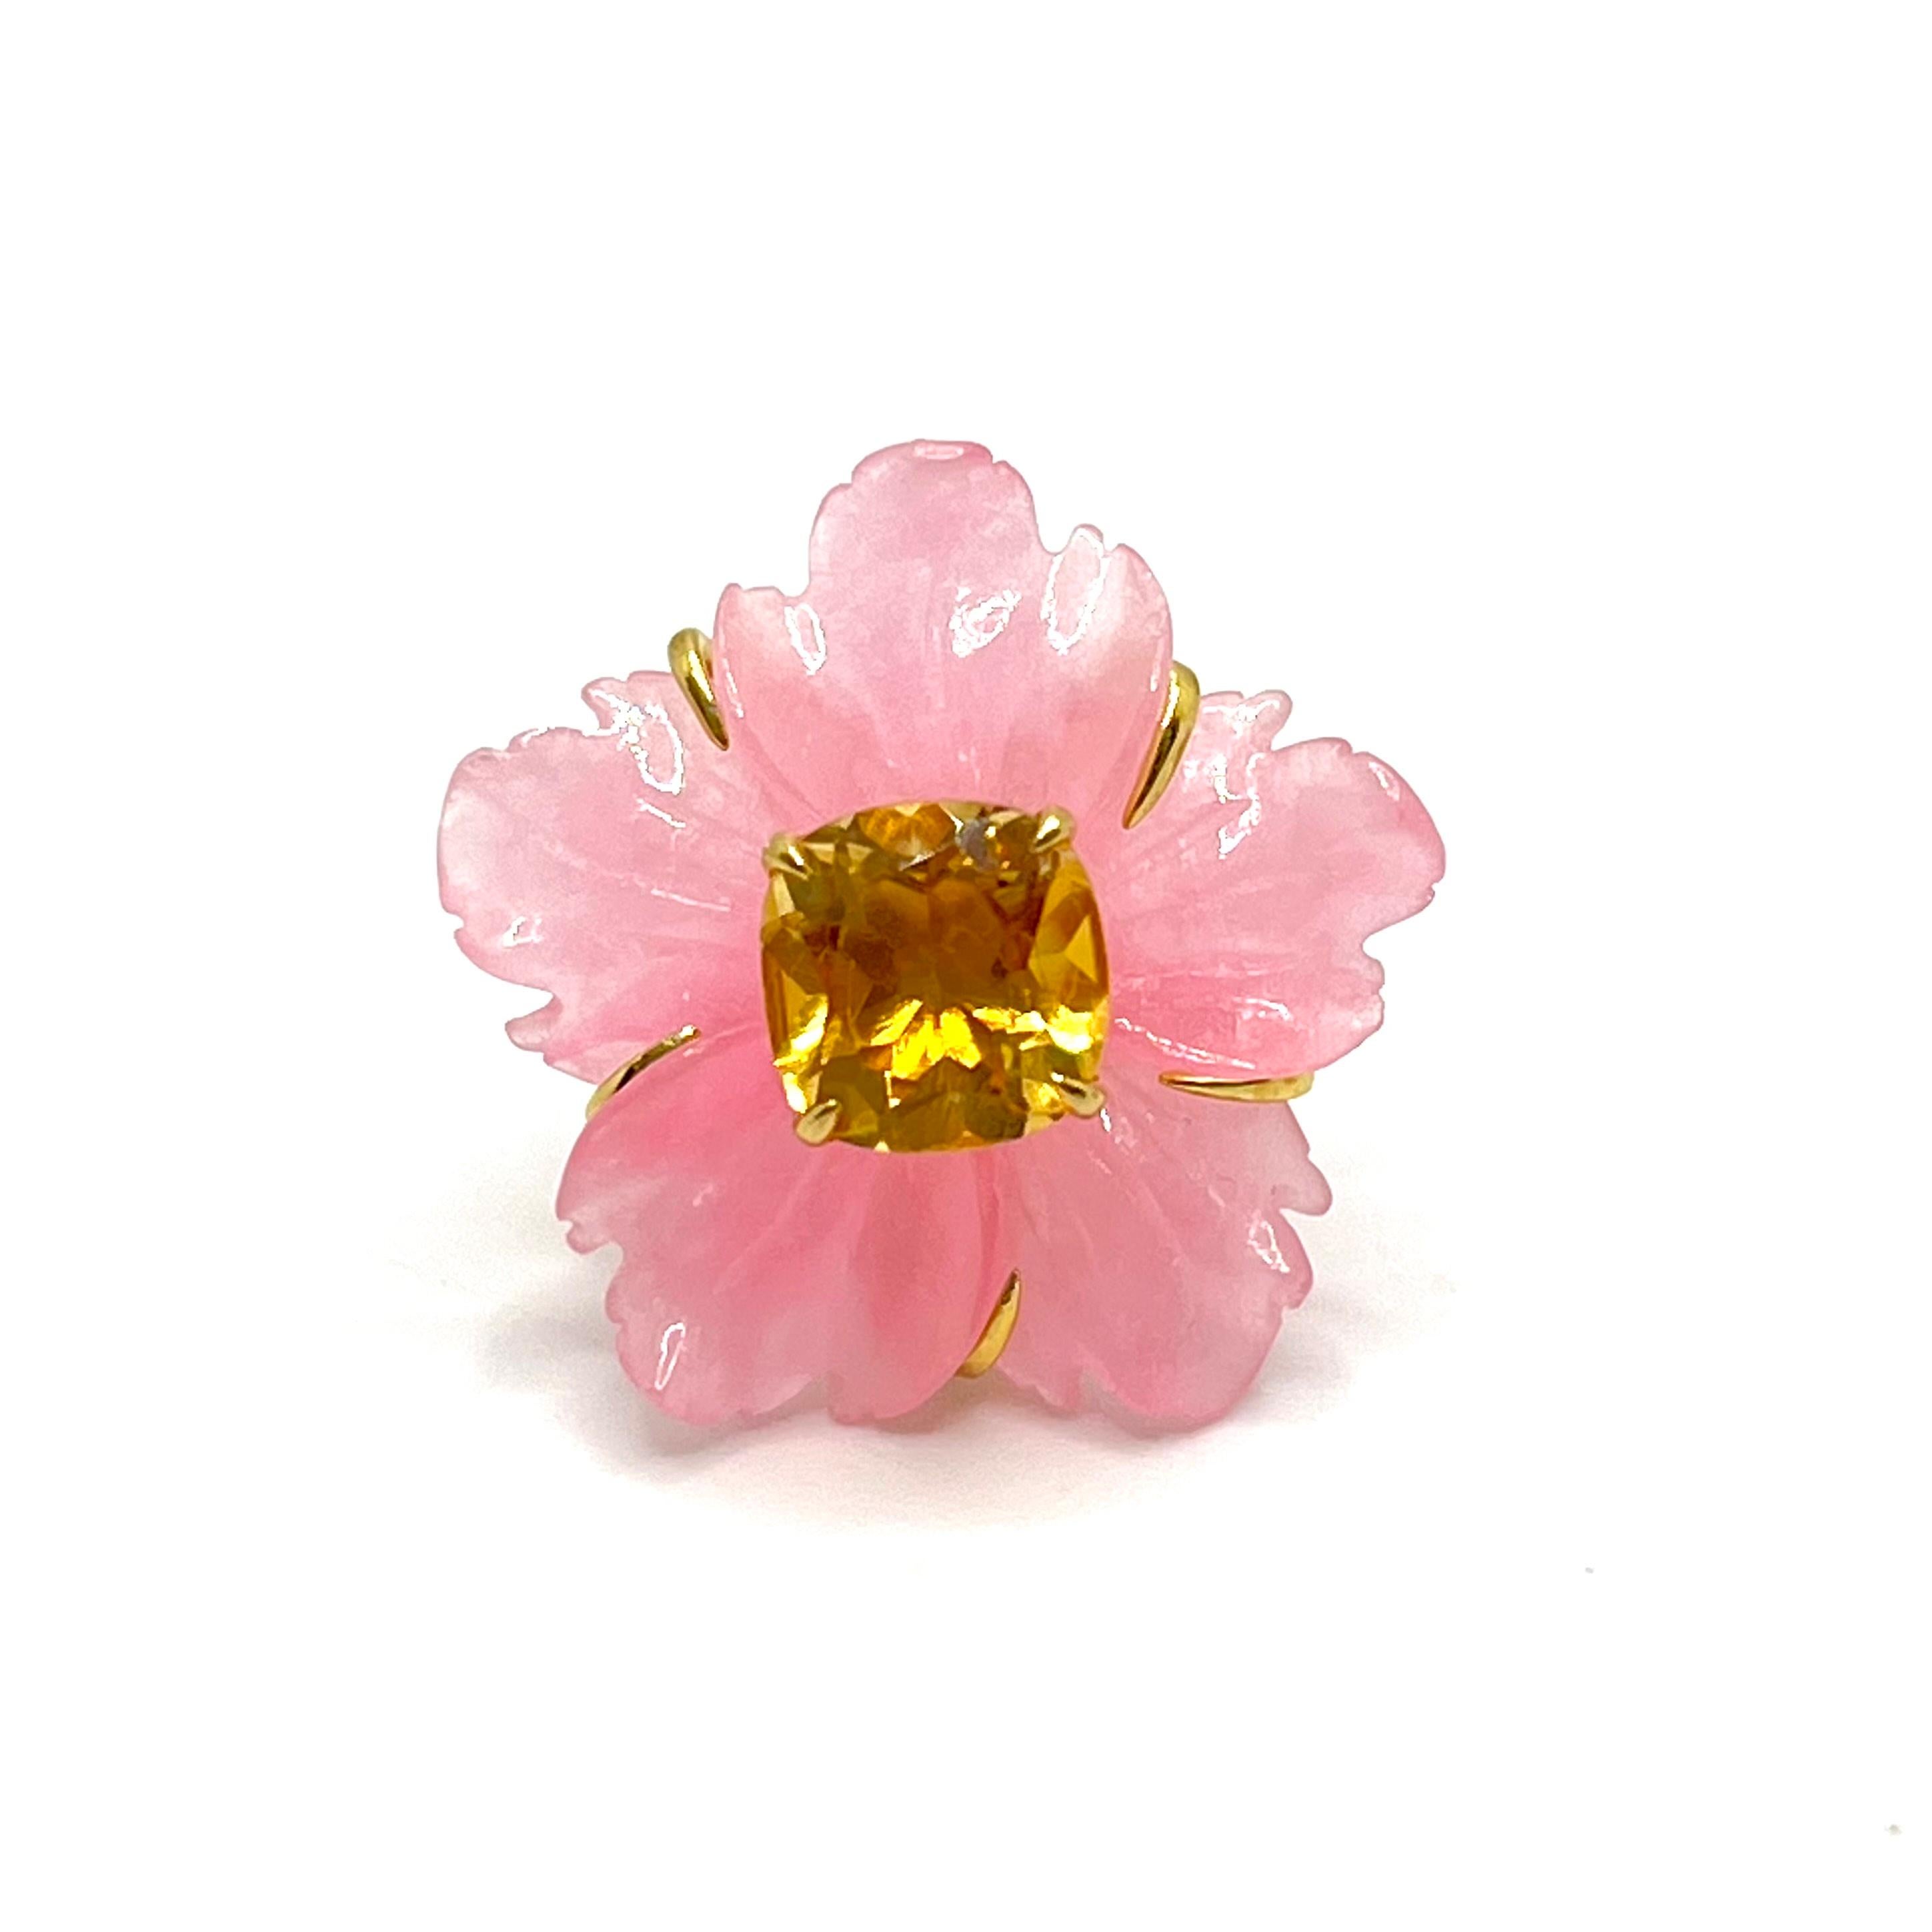 Artisan 25mm Carved Pink Quartzite Flower and Cushion-cut Citrine Earrings For Sale